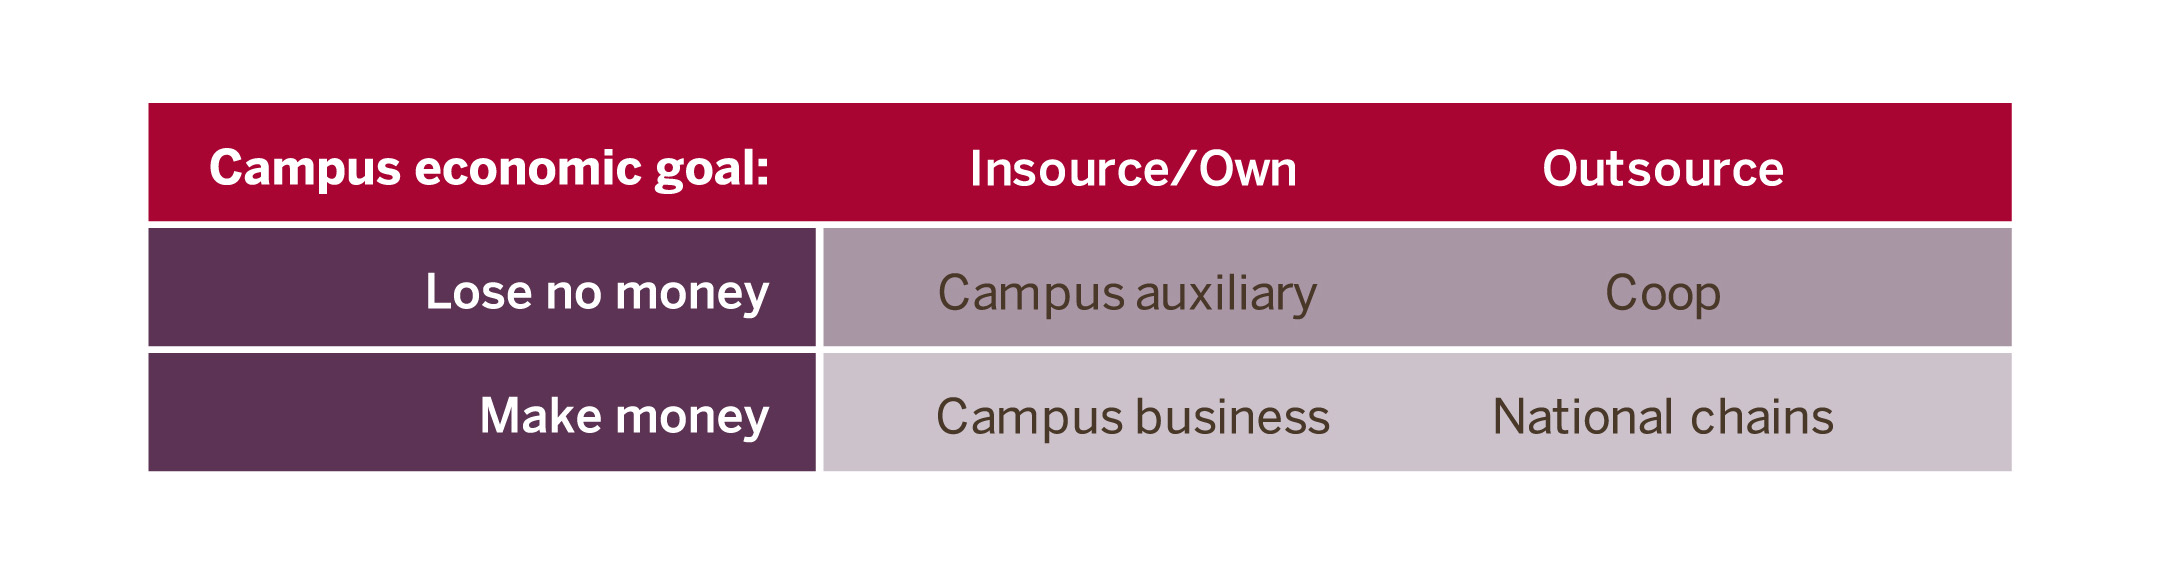 a matrix to illustrate the monetary institutional goals with the sourcing approach of insourcing or outsourcing the physical campus bookstore